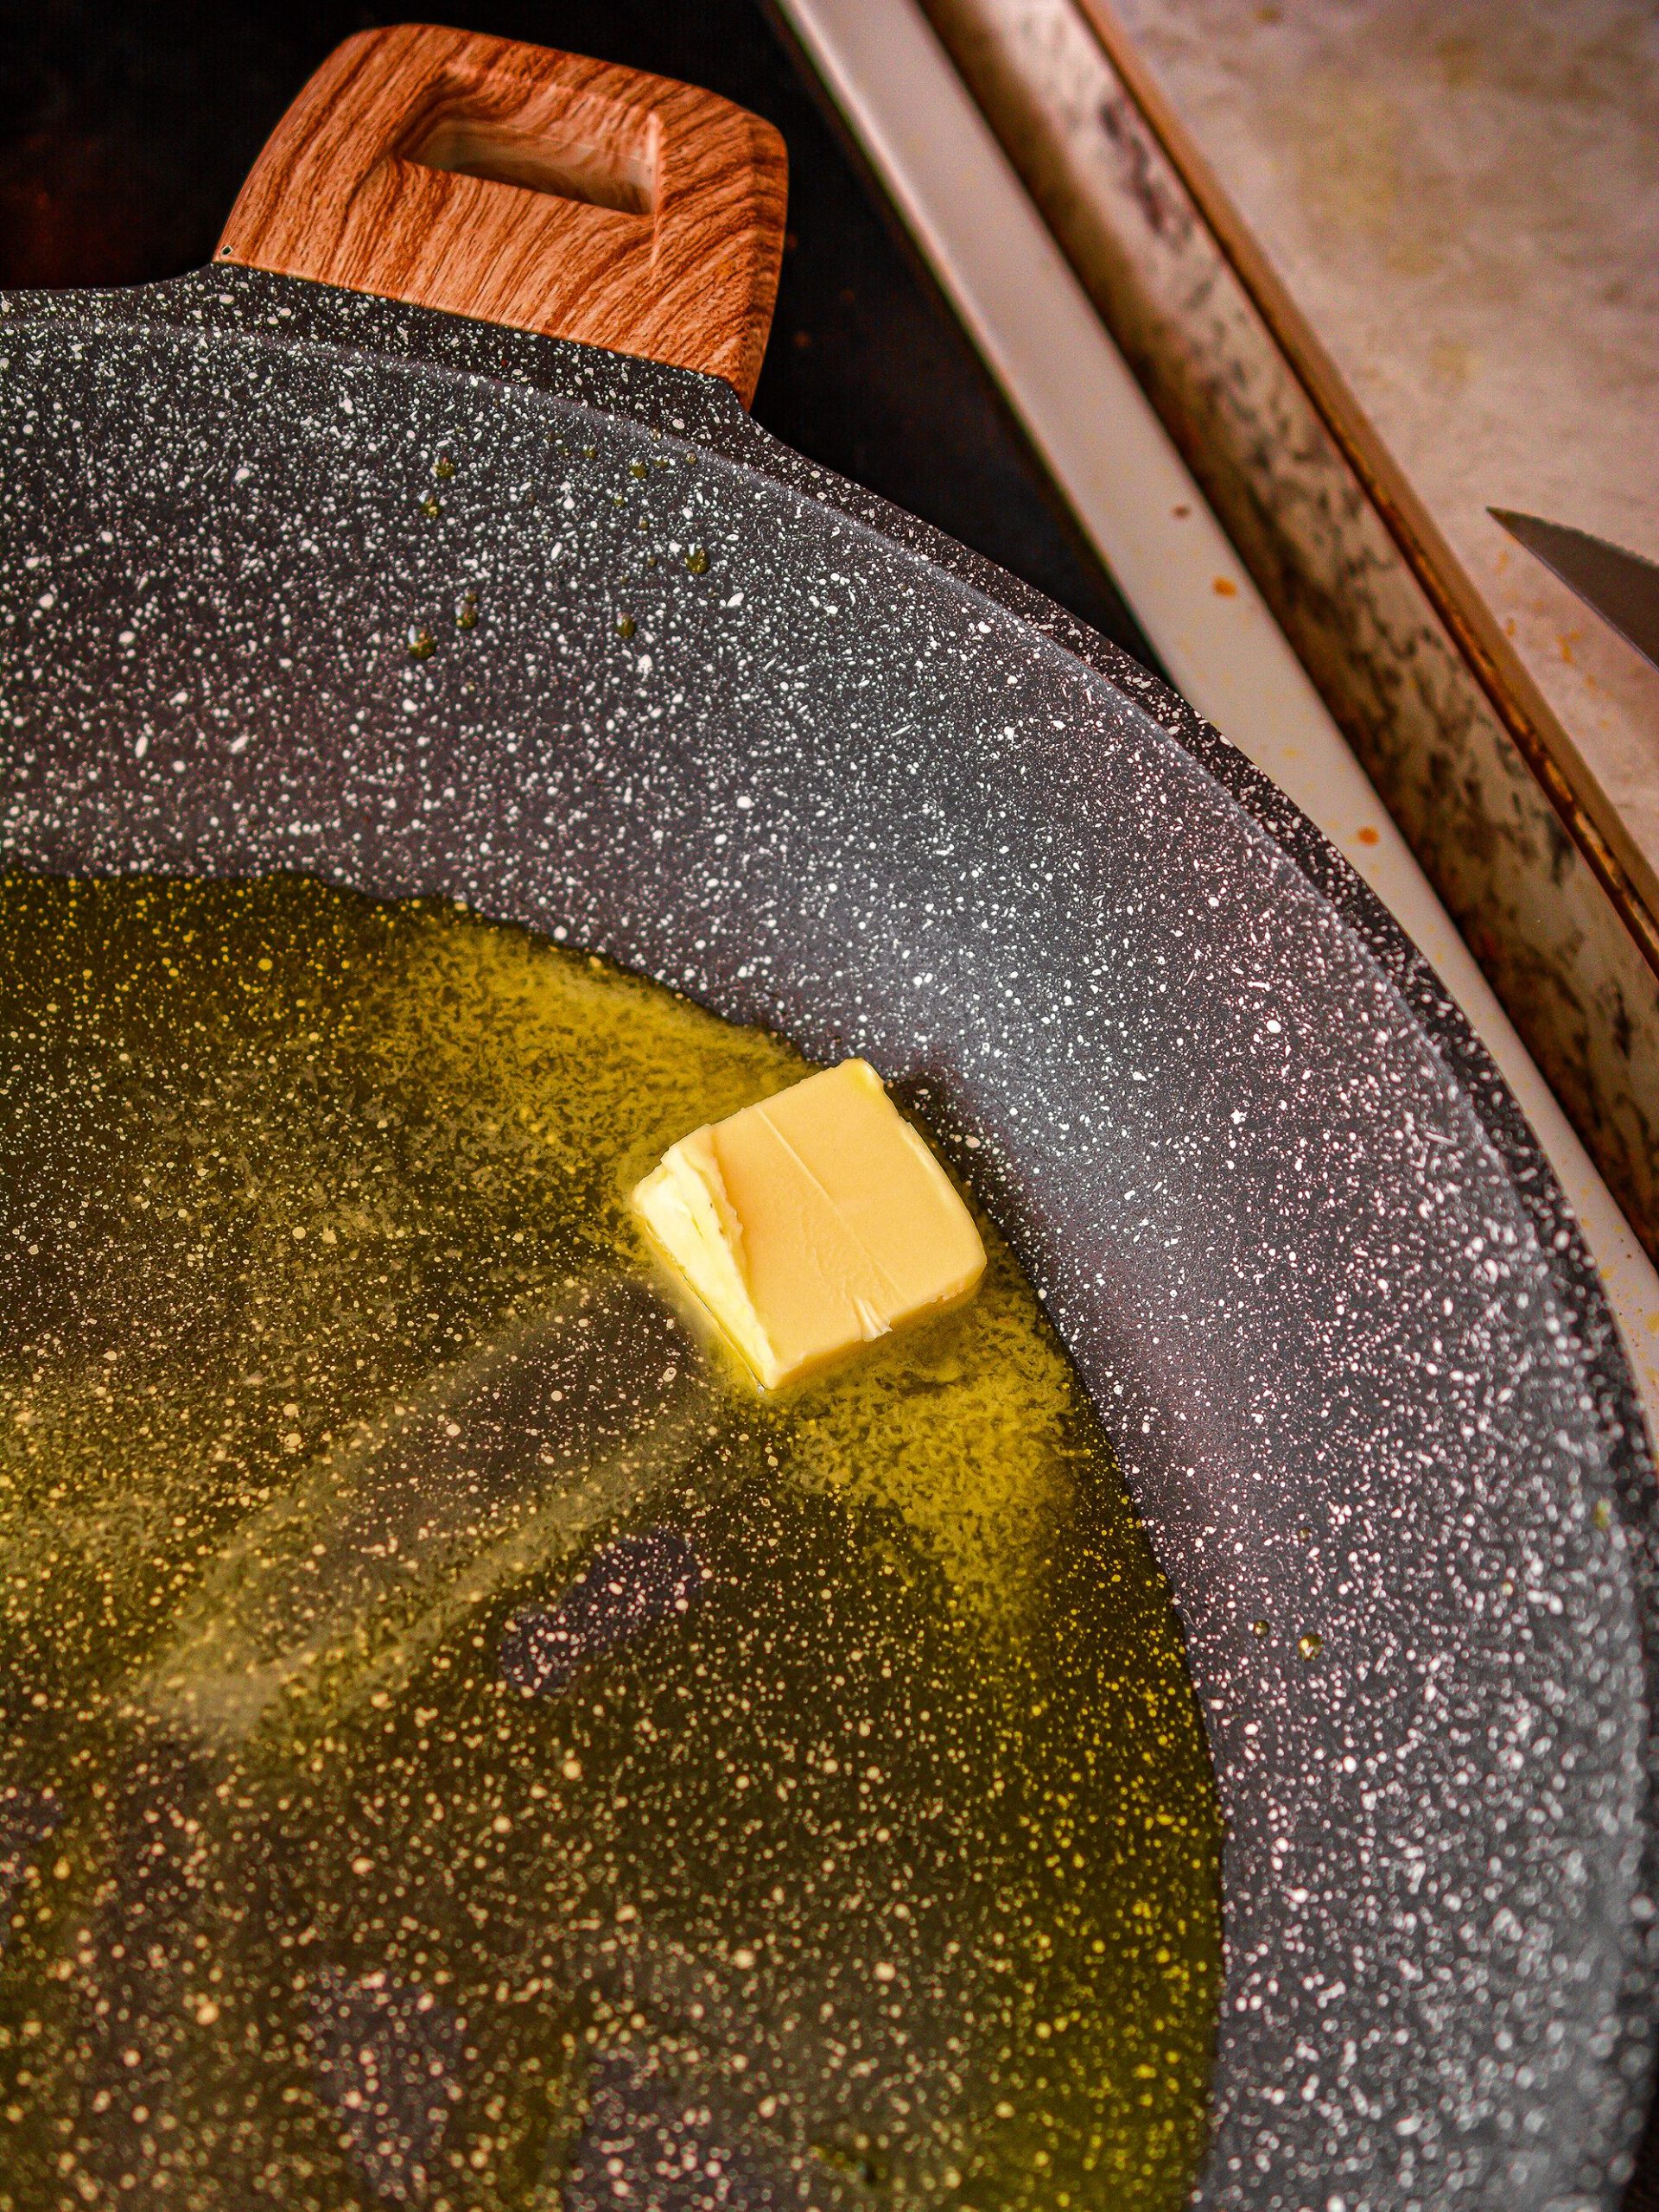 Heat the oil and butter in a skillet over medium high heat.